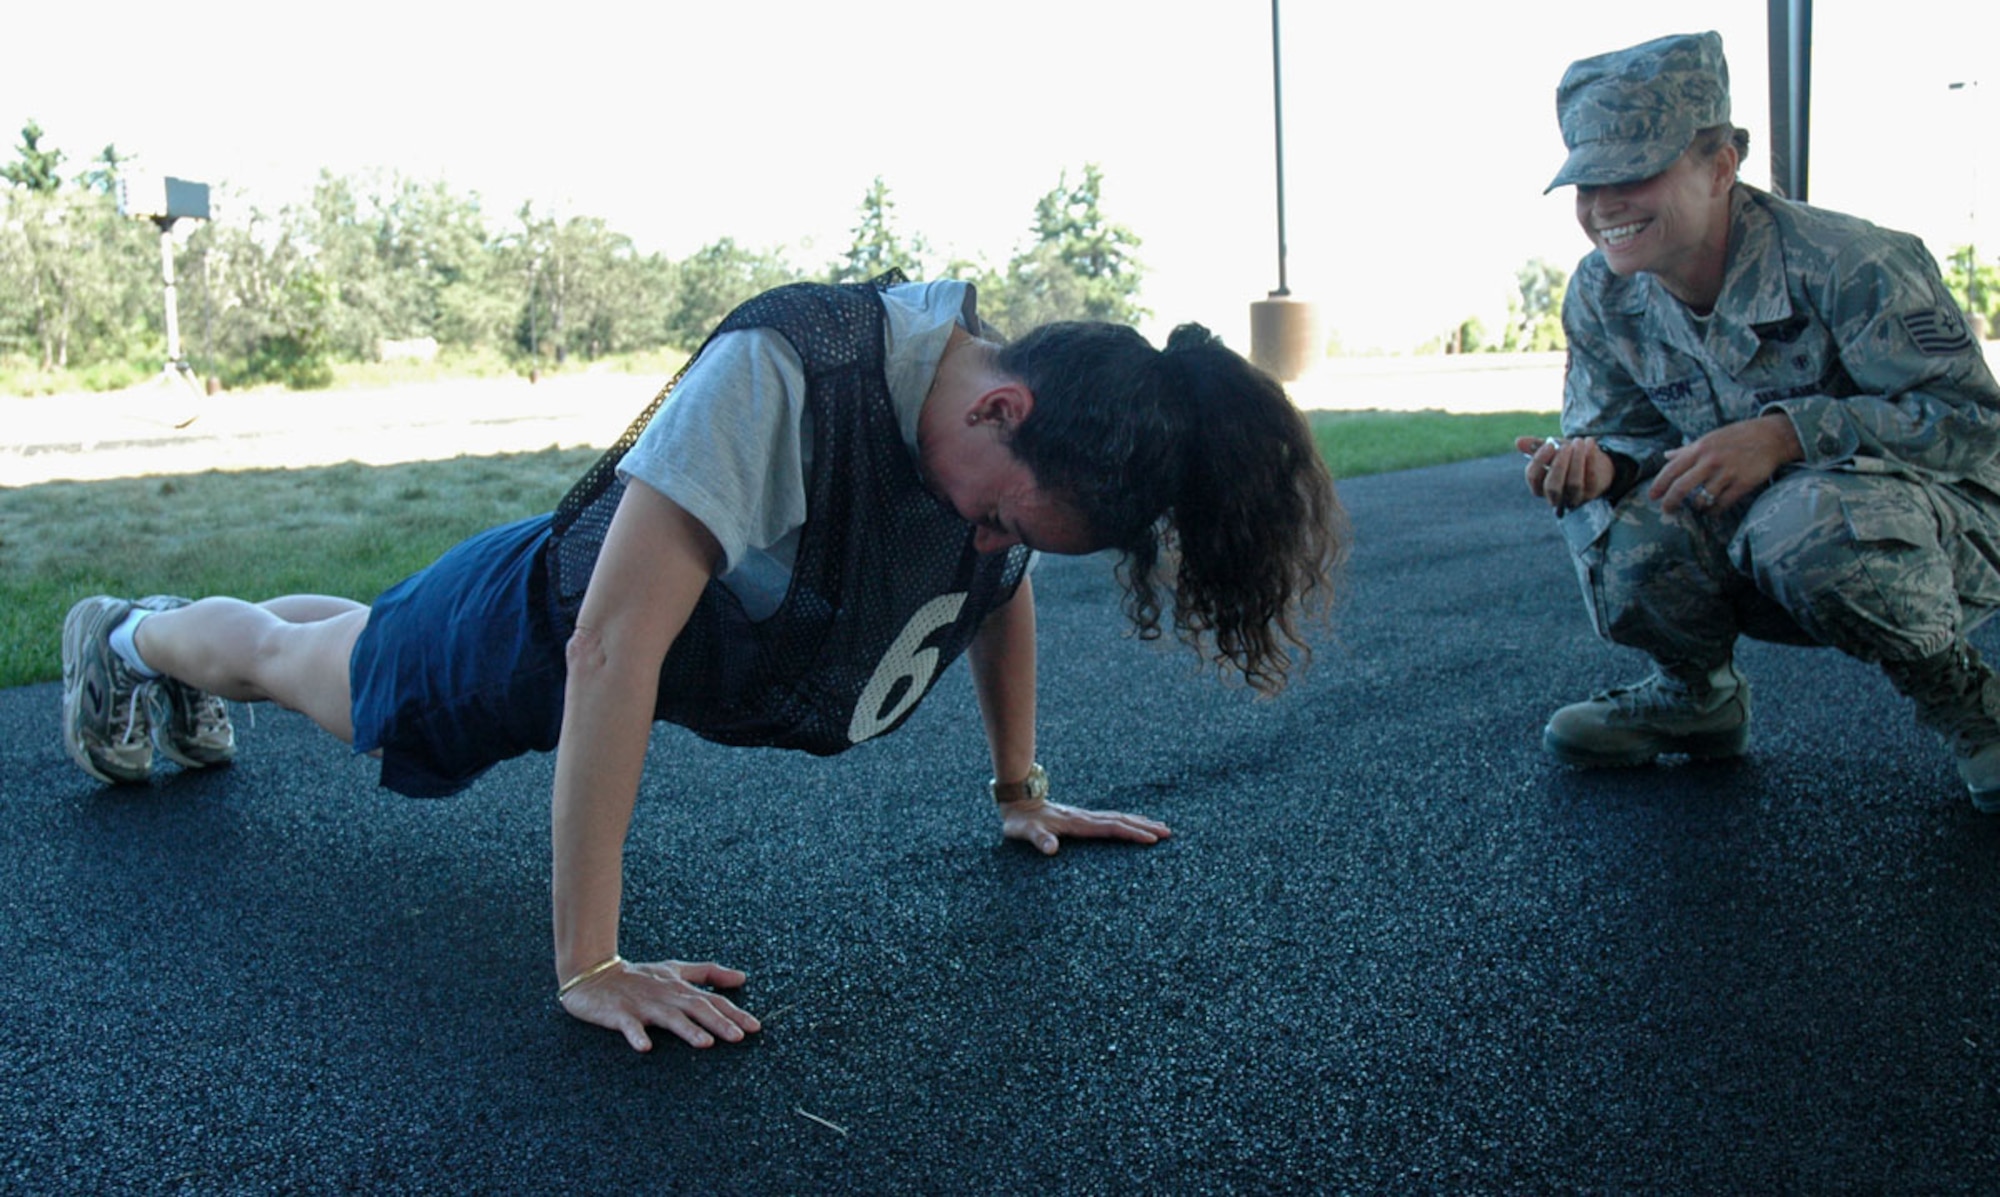 JOINT BASE LEWIS-MCCHORD, Wash. -- Maj. Esther Aubert, 446th Aeromedical Evacuation Squadron, cranks out push ups over the watchful eye of her fitness monitor, Tech Sgt. Jill Peterson, 446th AES, during a fitness assessment here July 10, 2010.  The new Air Force fitness program took effect July 1. The program will hold Airmen to more rigourous physical fitness standards in an effort to improve overall health and readiness. (U.S. Air Force photo/Staff Sgt. Grant Saylor)